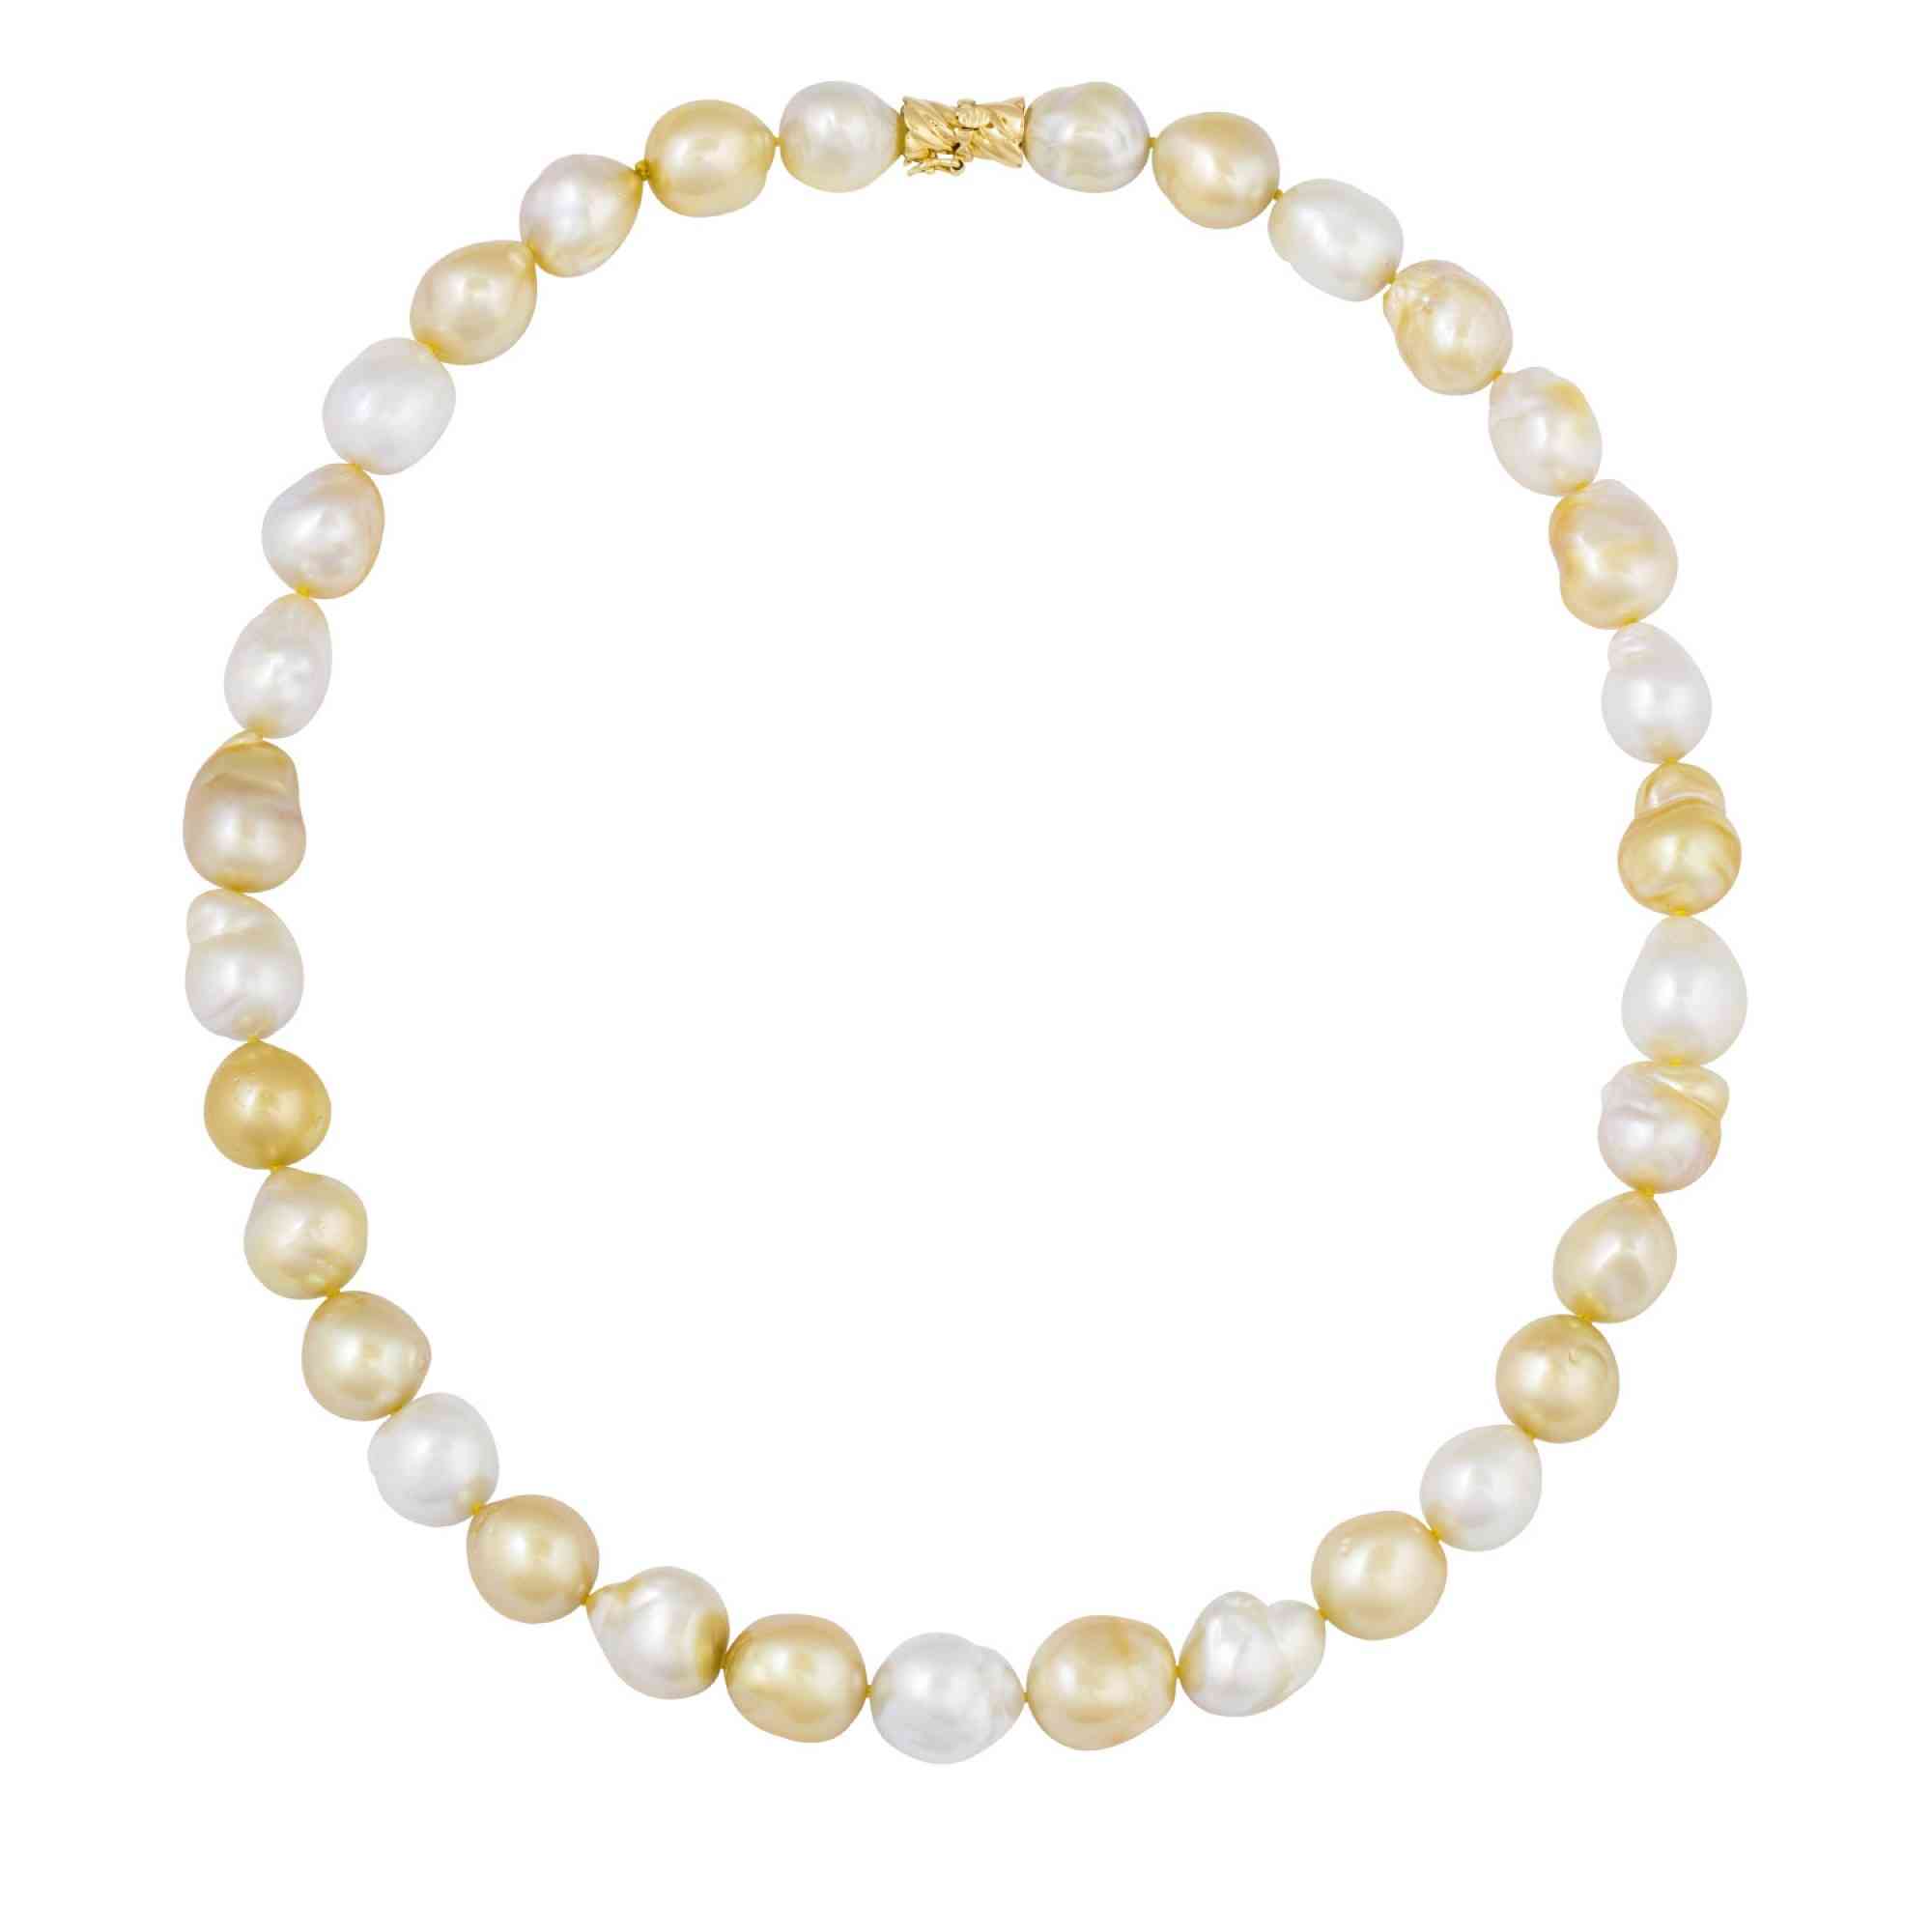 JEWELMER - A beautiful Baroque-style white and golden cultured South ...